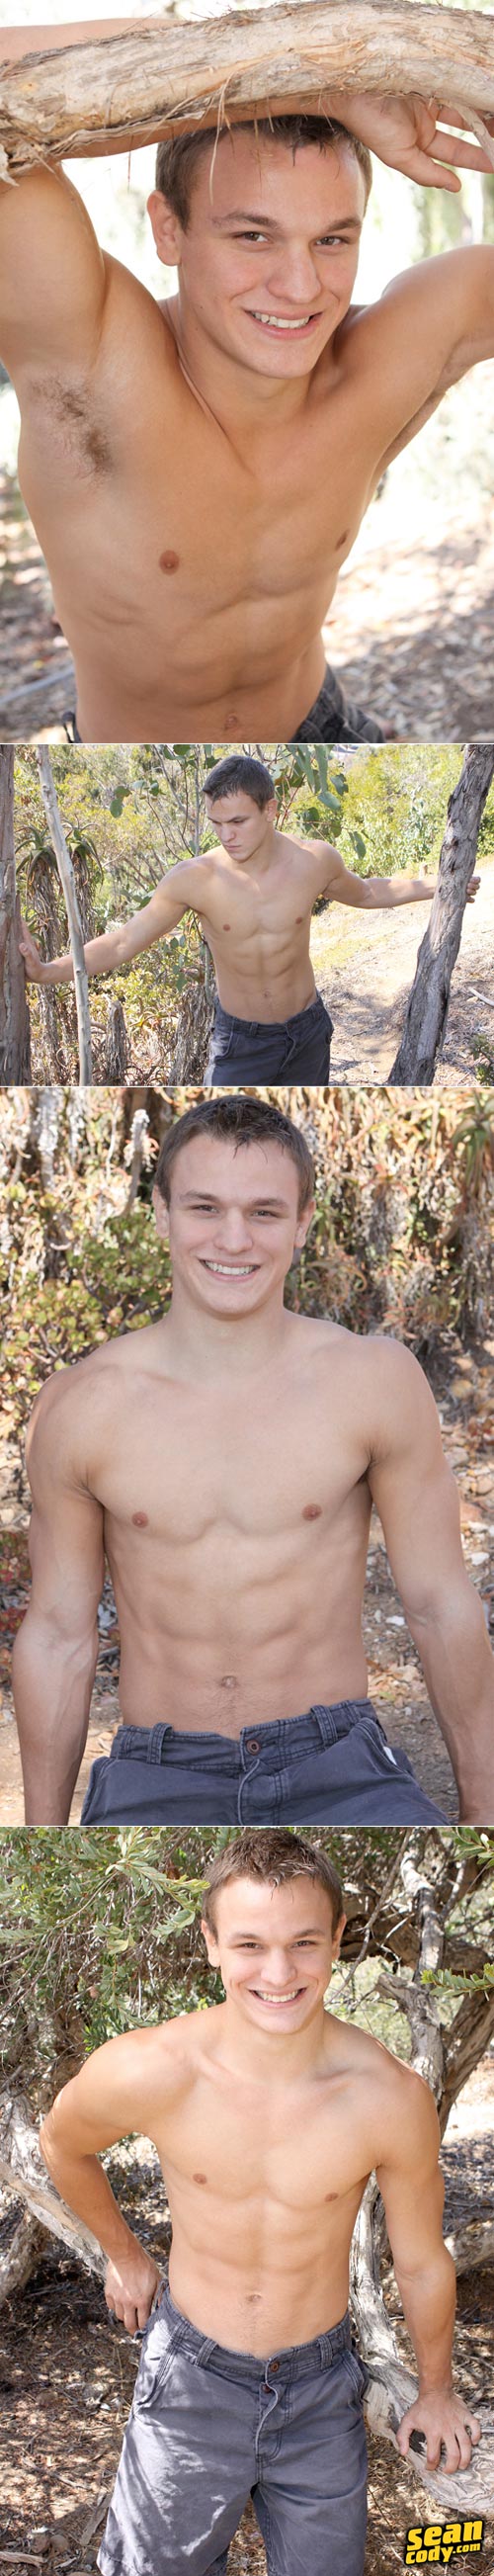 Colby II at SeanCody